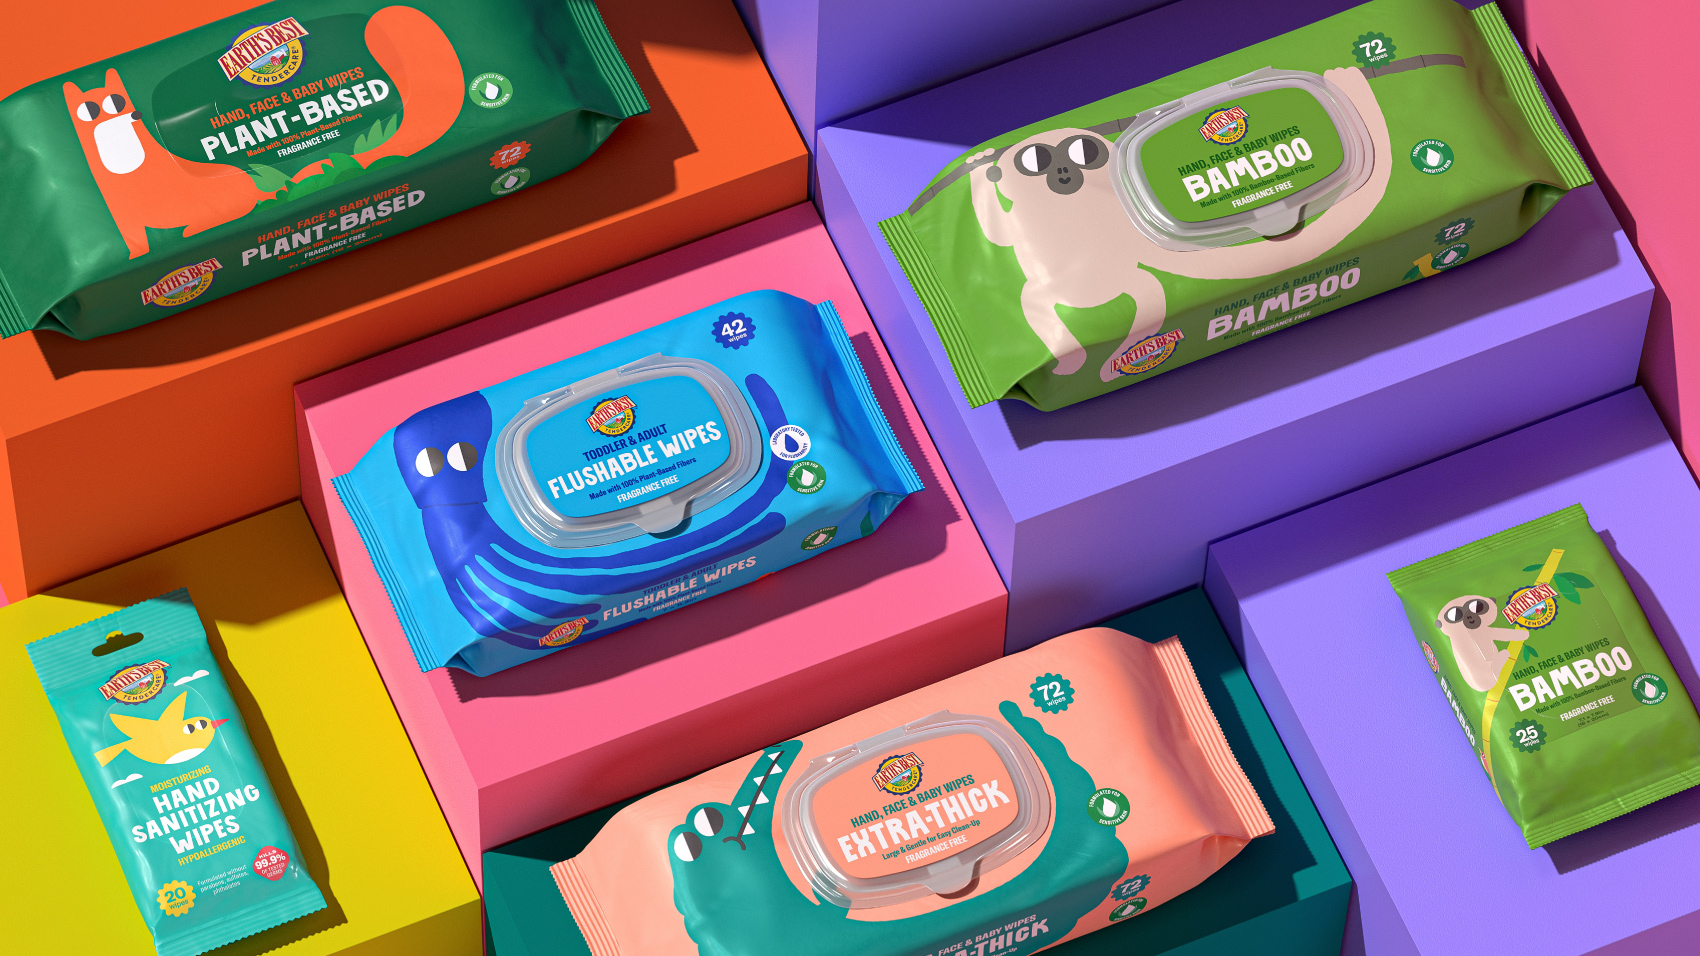 A Super Cute and Bold Look on Earth’s Best Natural Baby Wipes Designed by Caparo